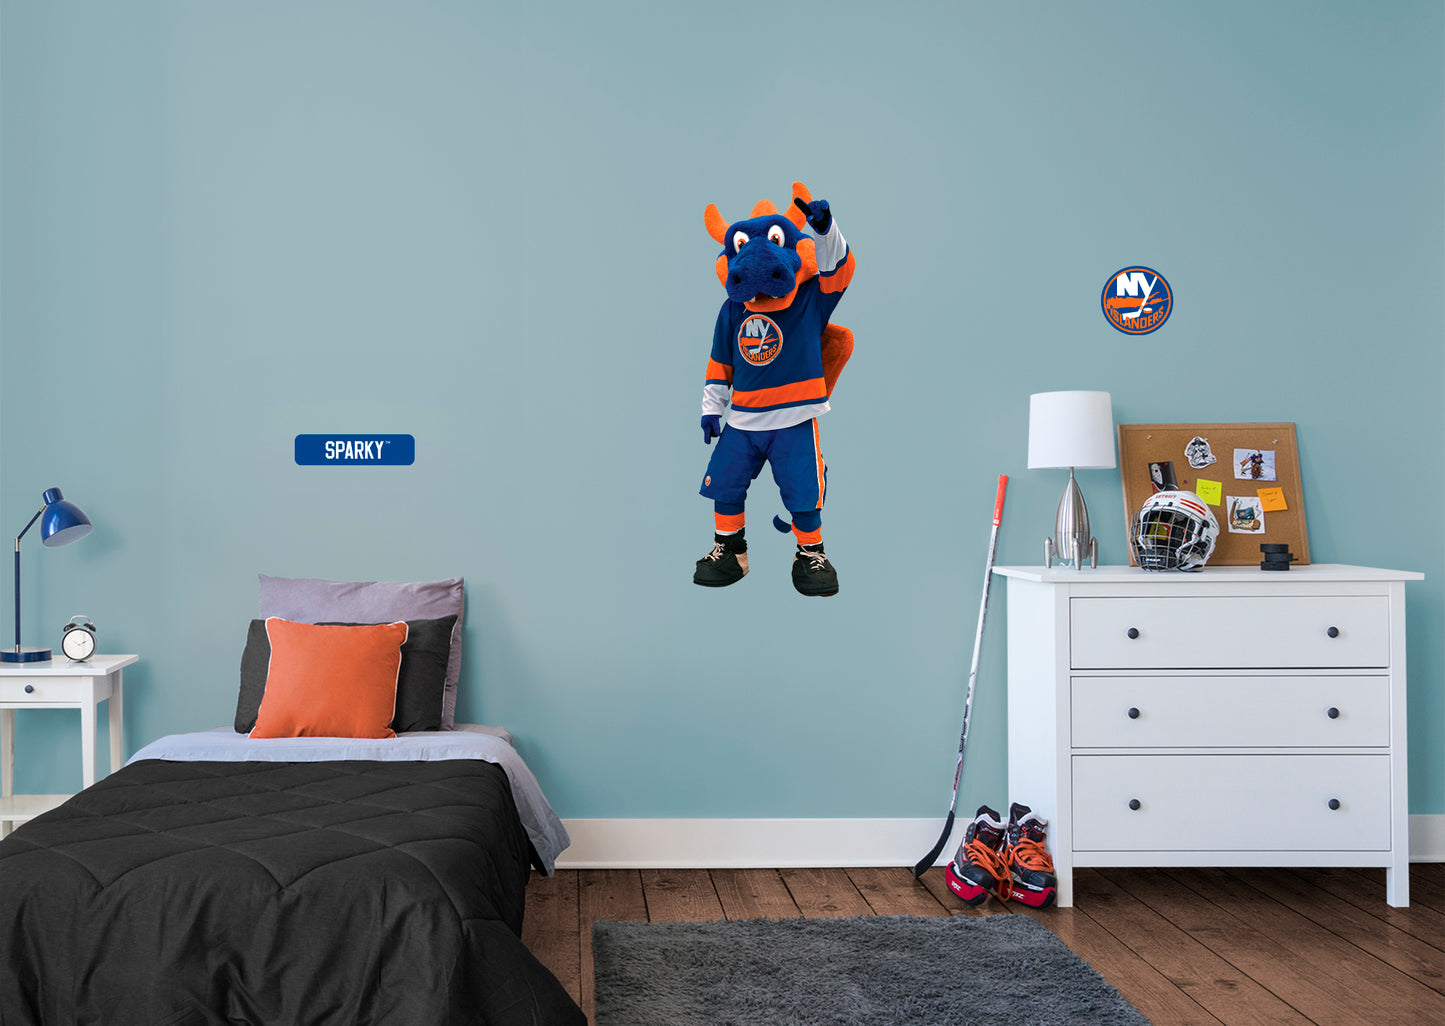 New York Islanders: Sparky 2021 Mascot        - Officially Licensed NHL Removable Wall   Adhesive Decal